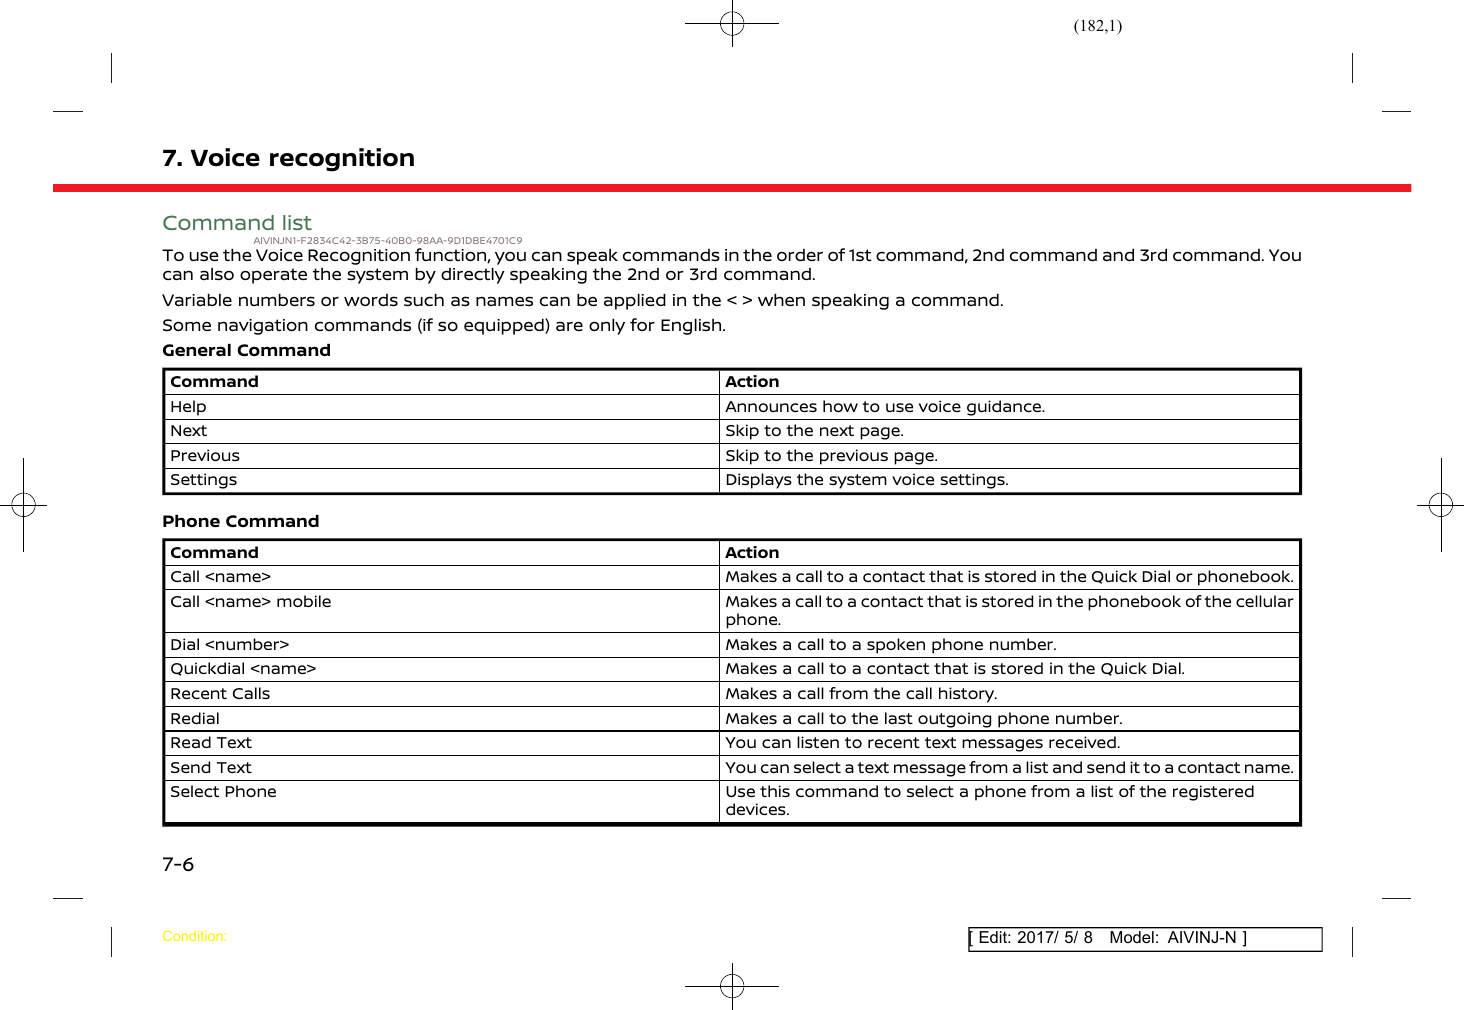 Page 182 of Robert Bosch Car Multimedia AIVICMFB0 Navigation System with Bluetooth and WLAN User Manual